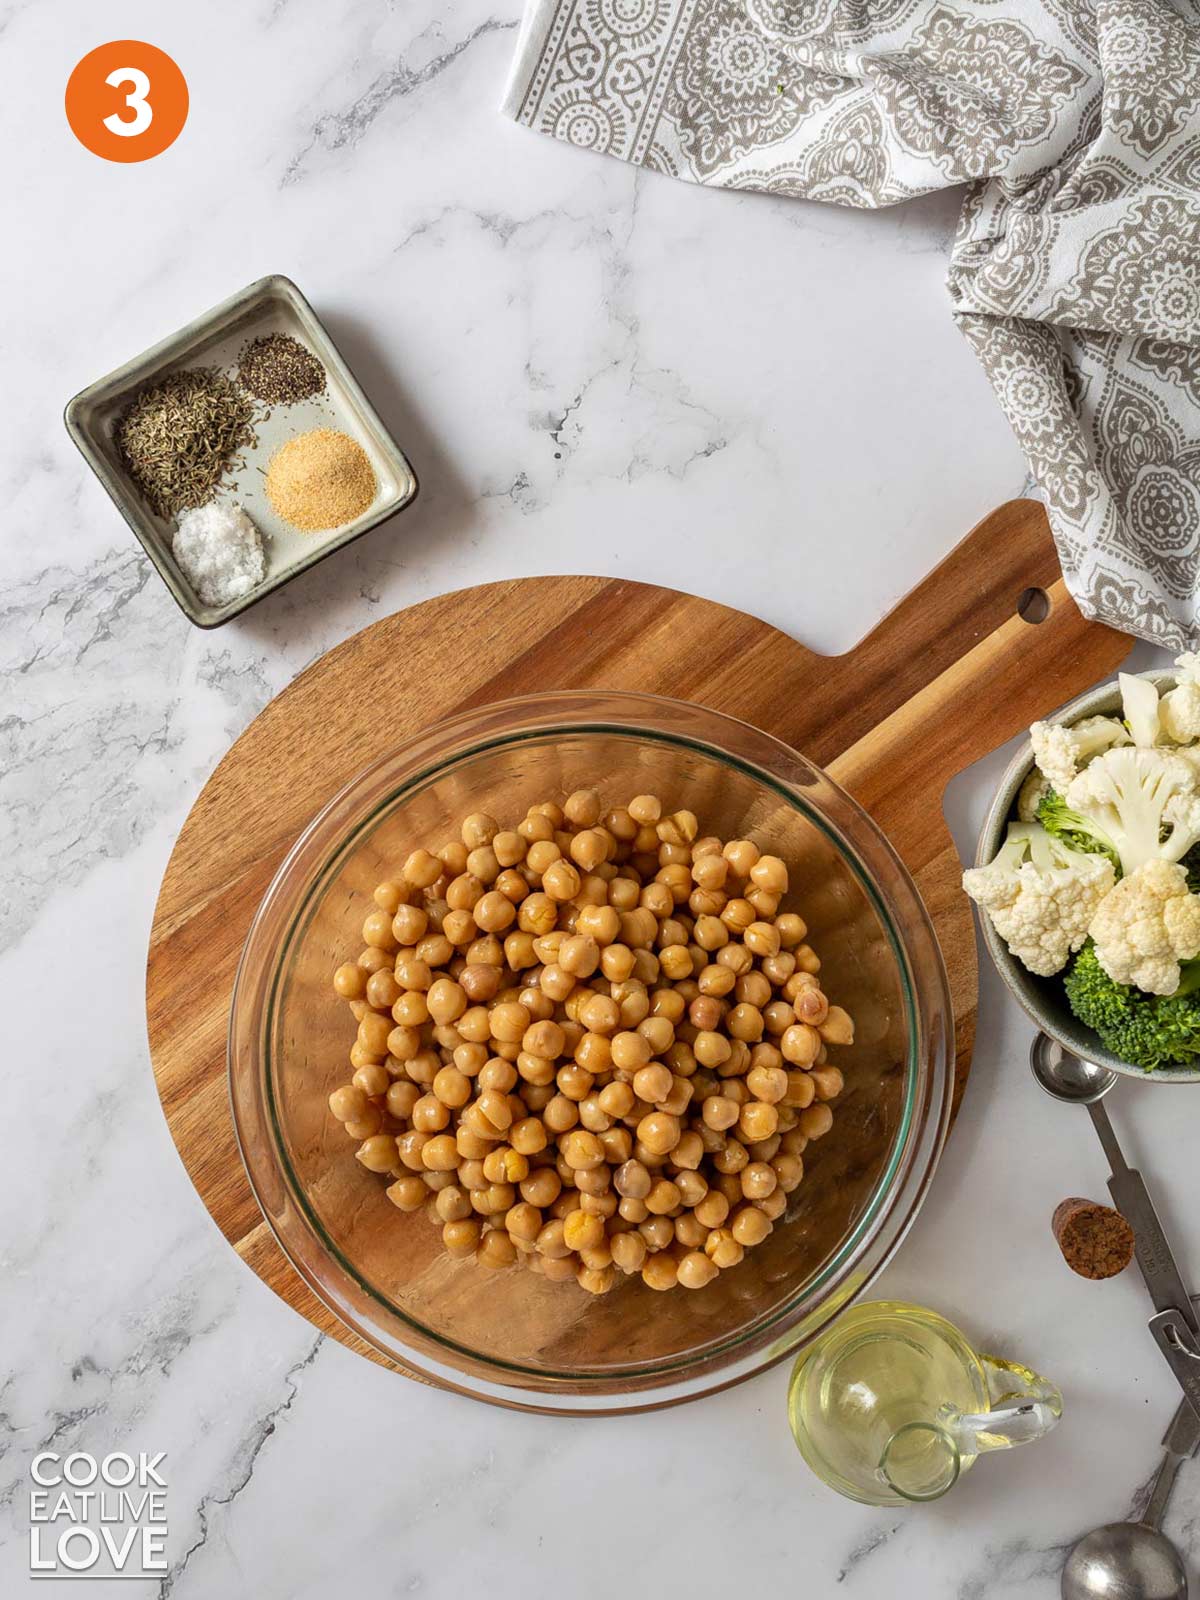 Chickpeas in a bowl on the table.